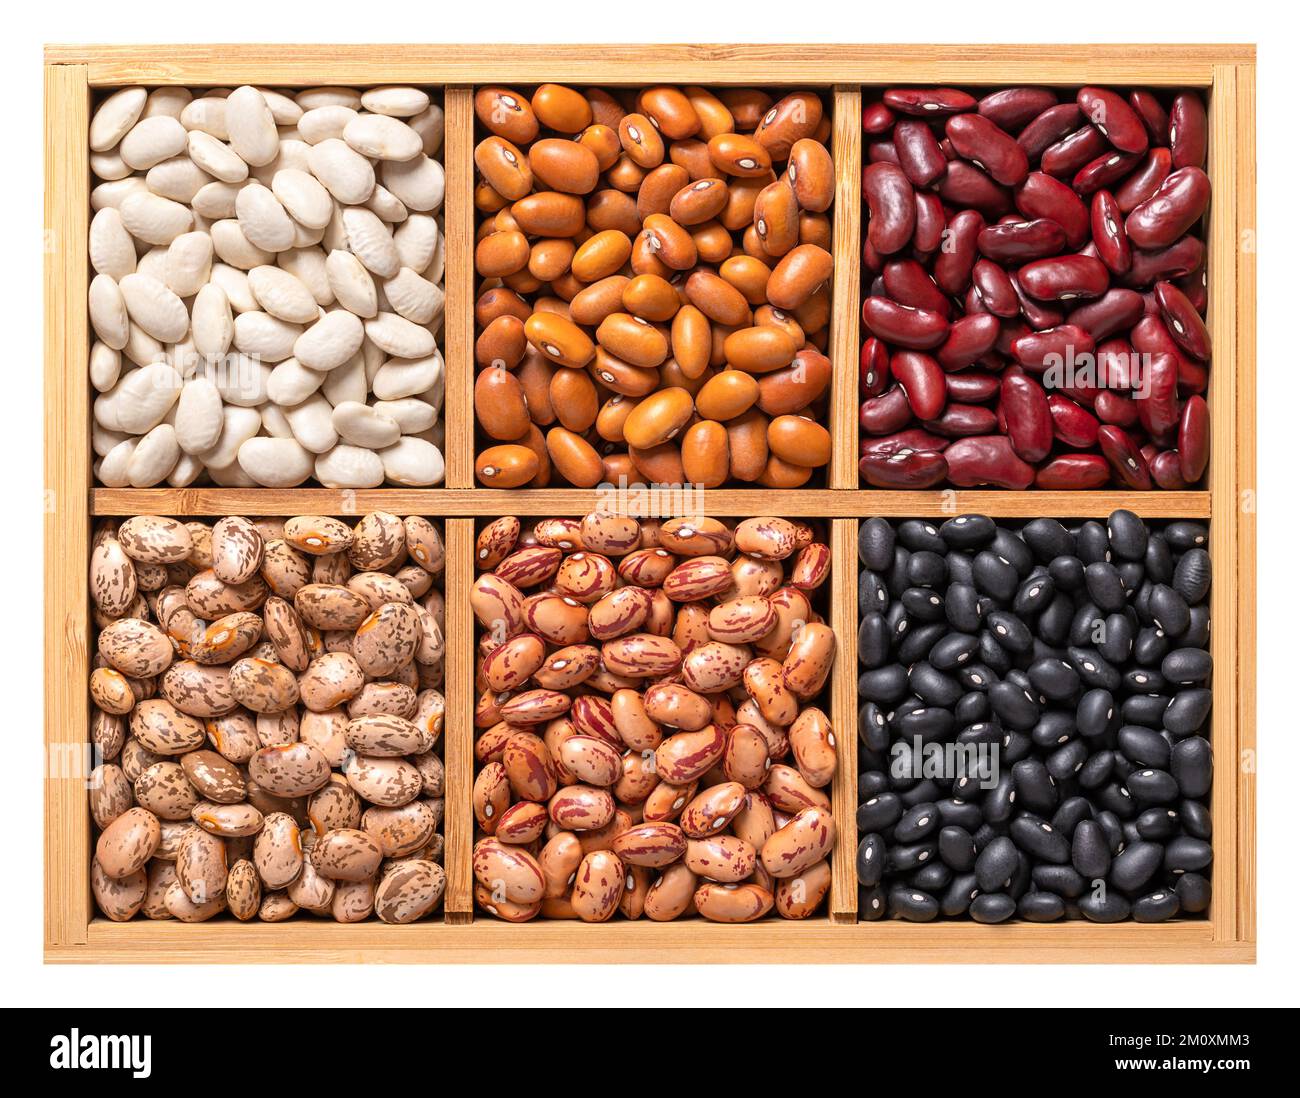 Variety of dried common beans, pulse assortment in a wooden box. White navy, Dutch brown, kidney, pinto, cranberry and black turtle beans. Stock Photo